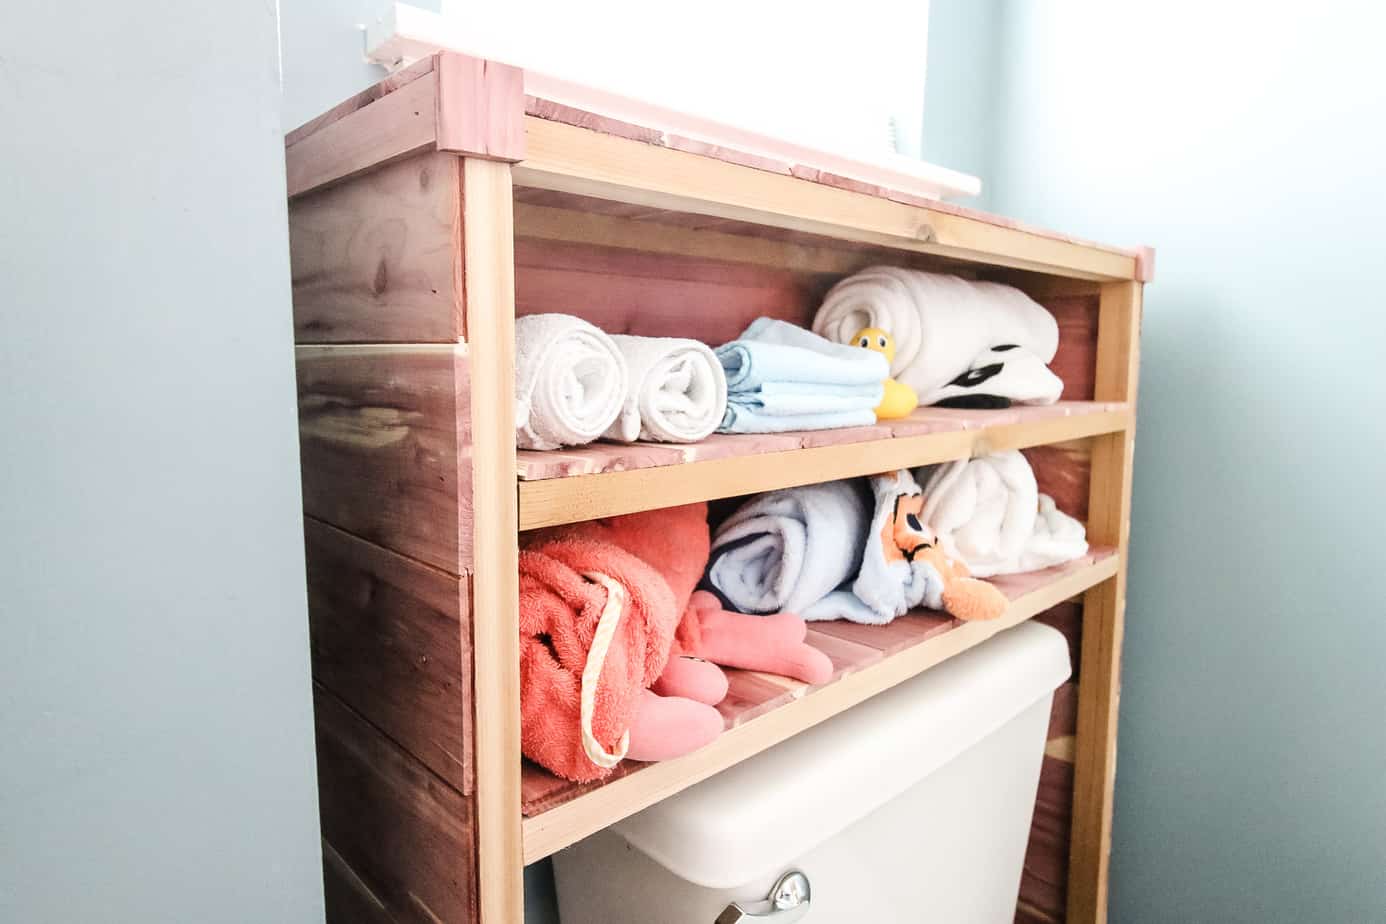 Over the Toilet Storage - Charleston Crafted